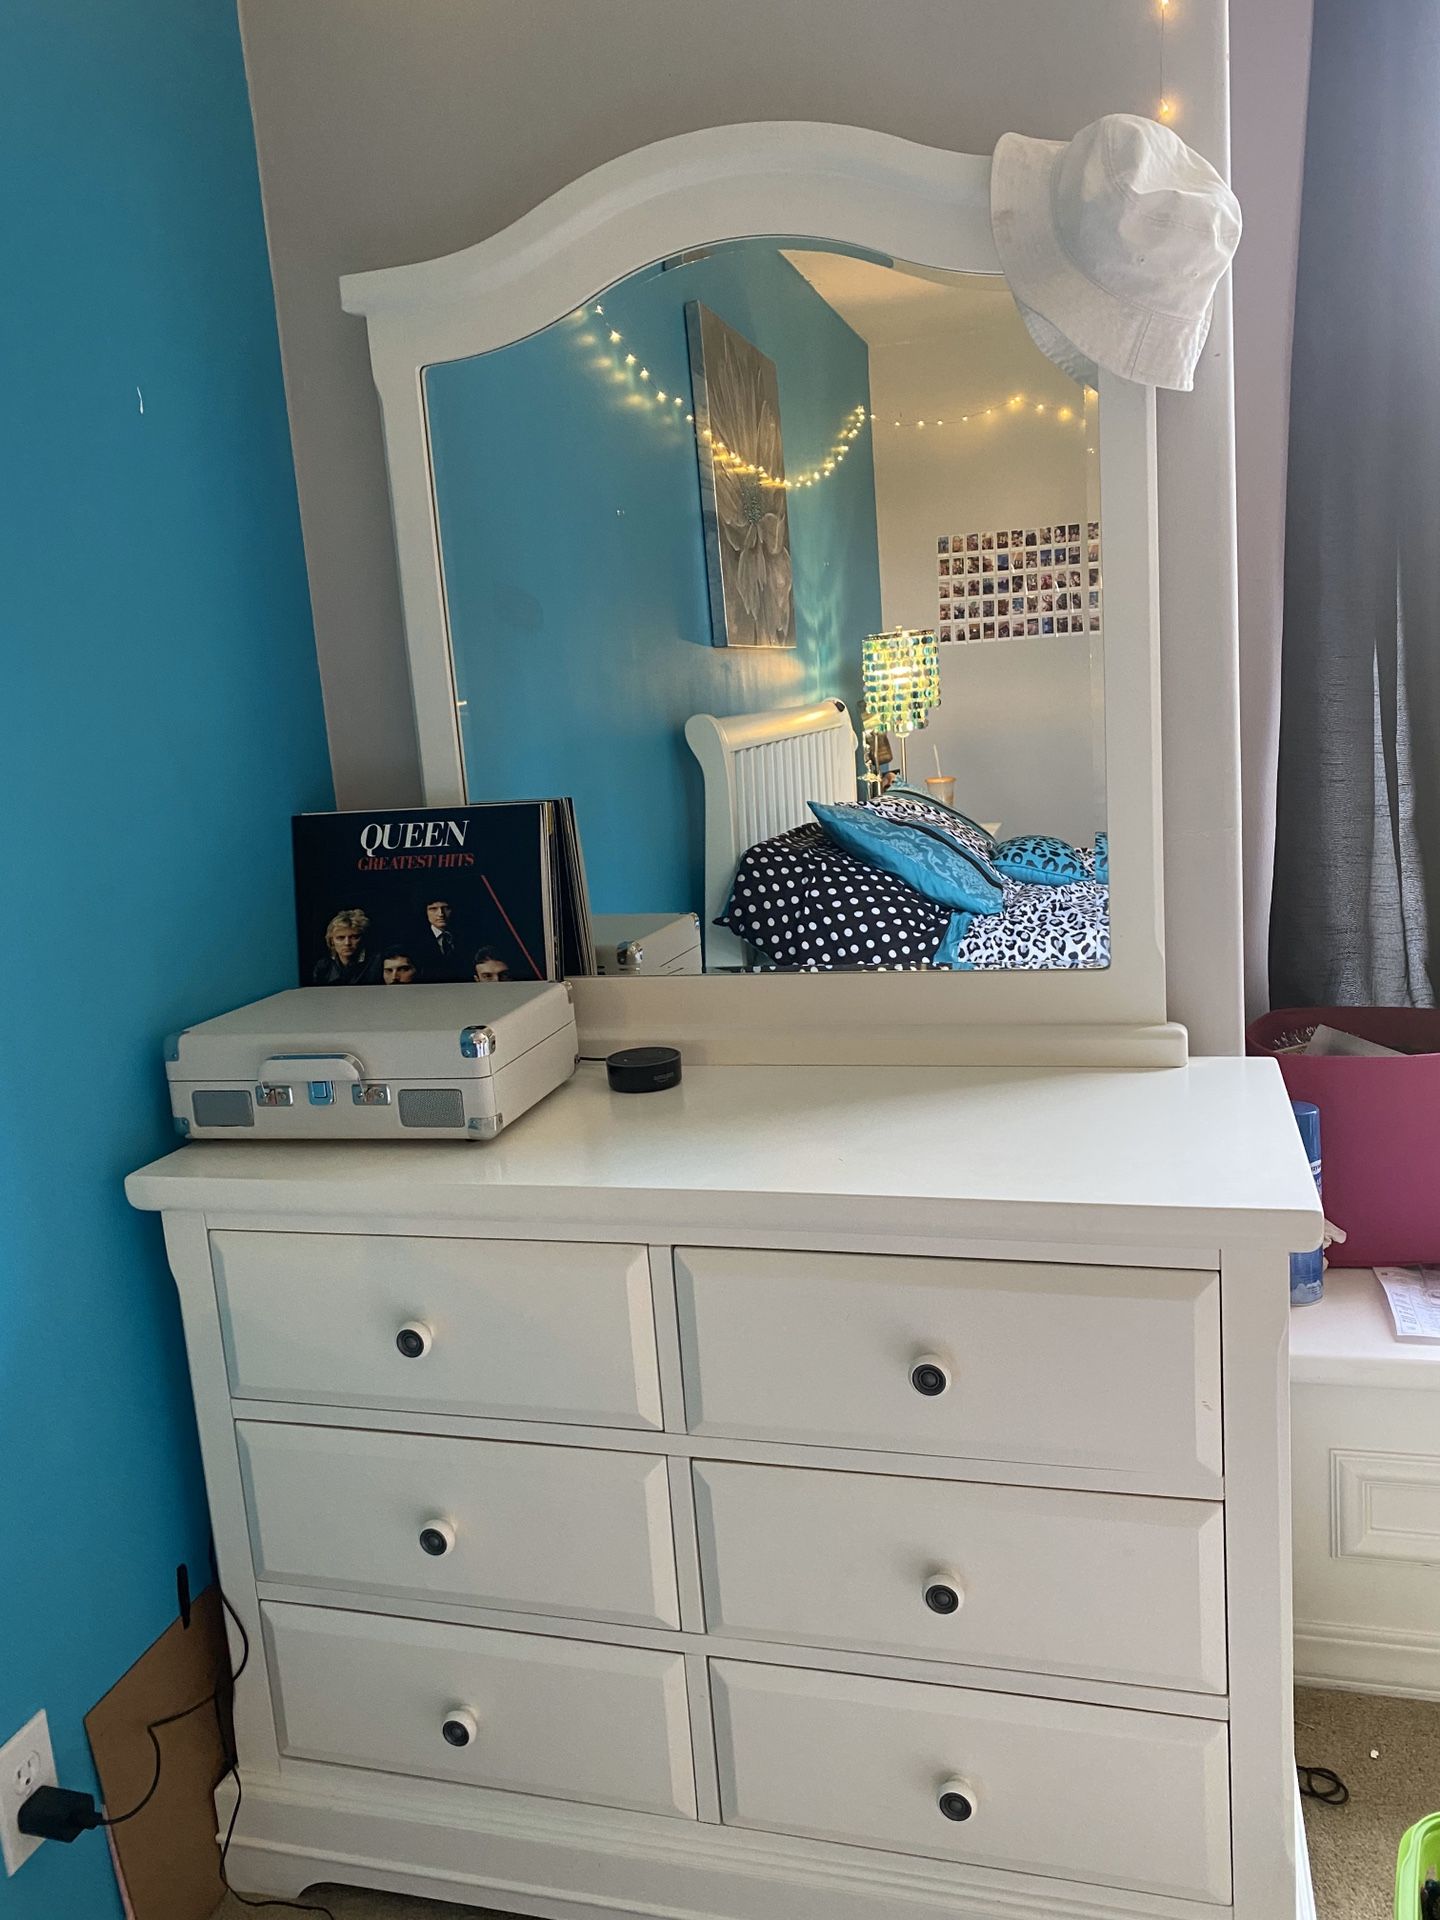 For sale young Girls bedroom set, night stand and dresser